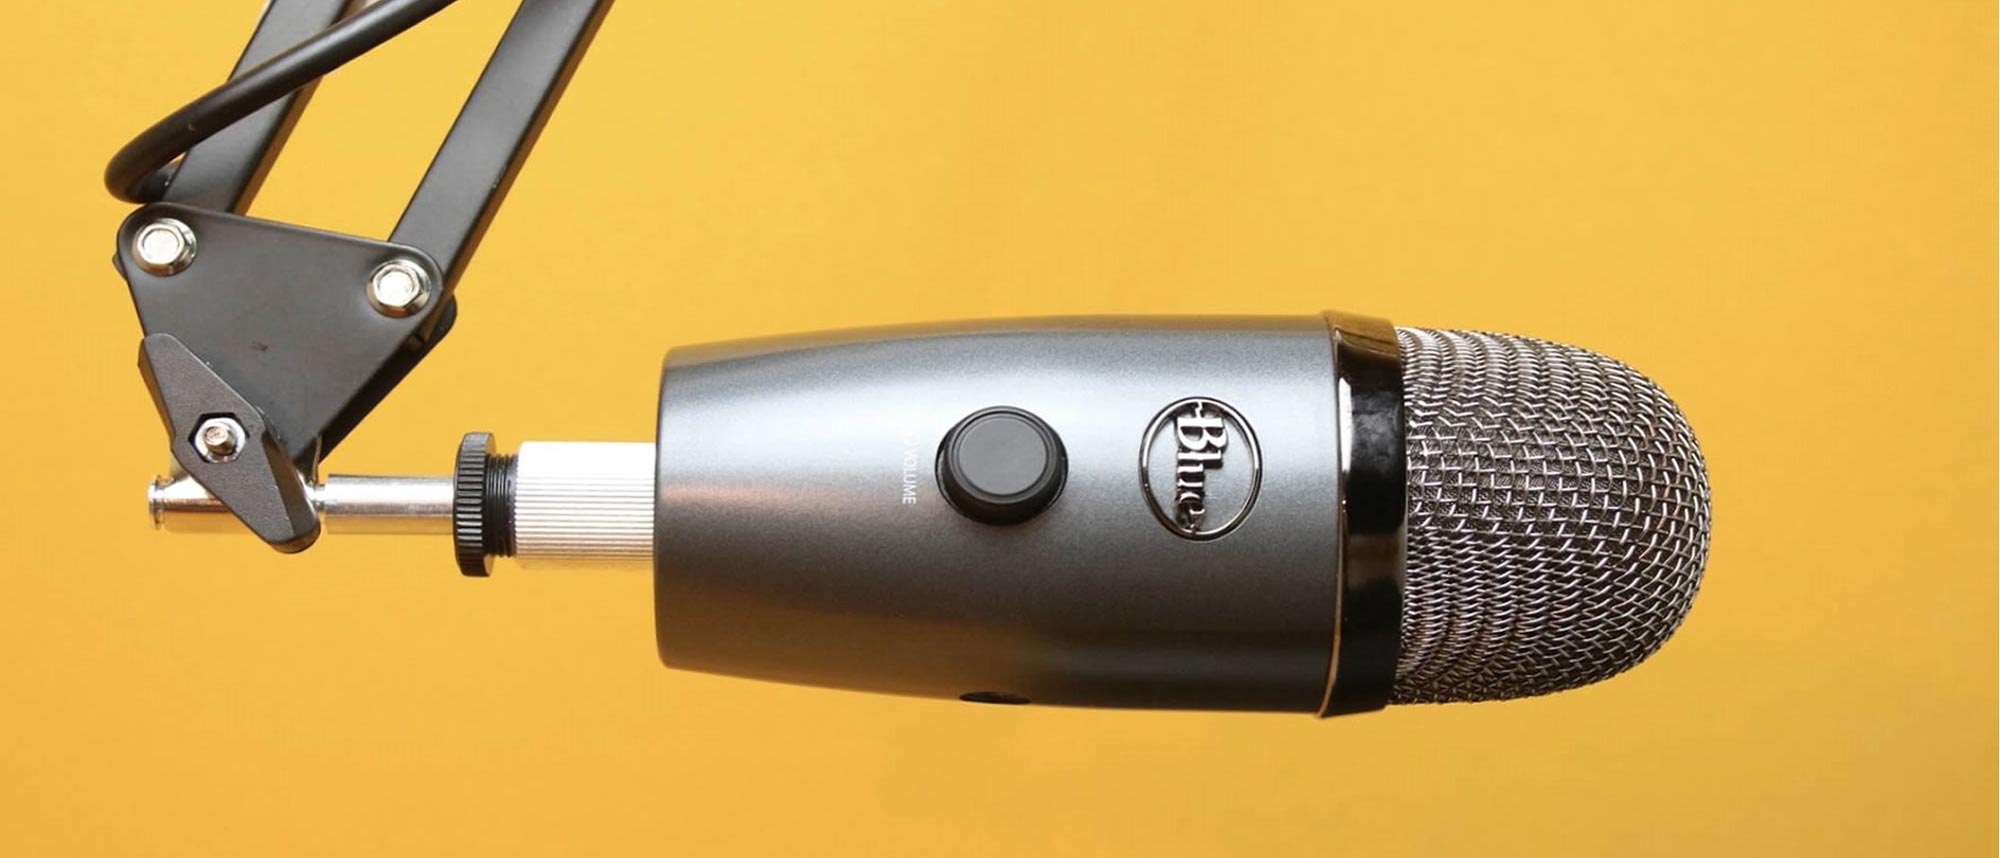 Blue Yeti Tutorial: How To Use The Blue Yeti Microphone To Get